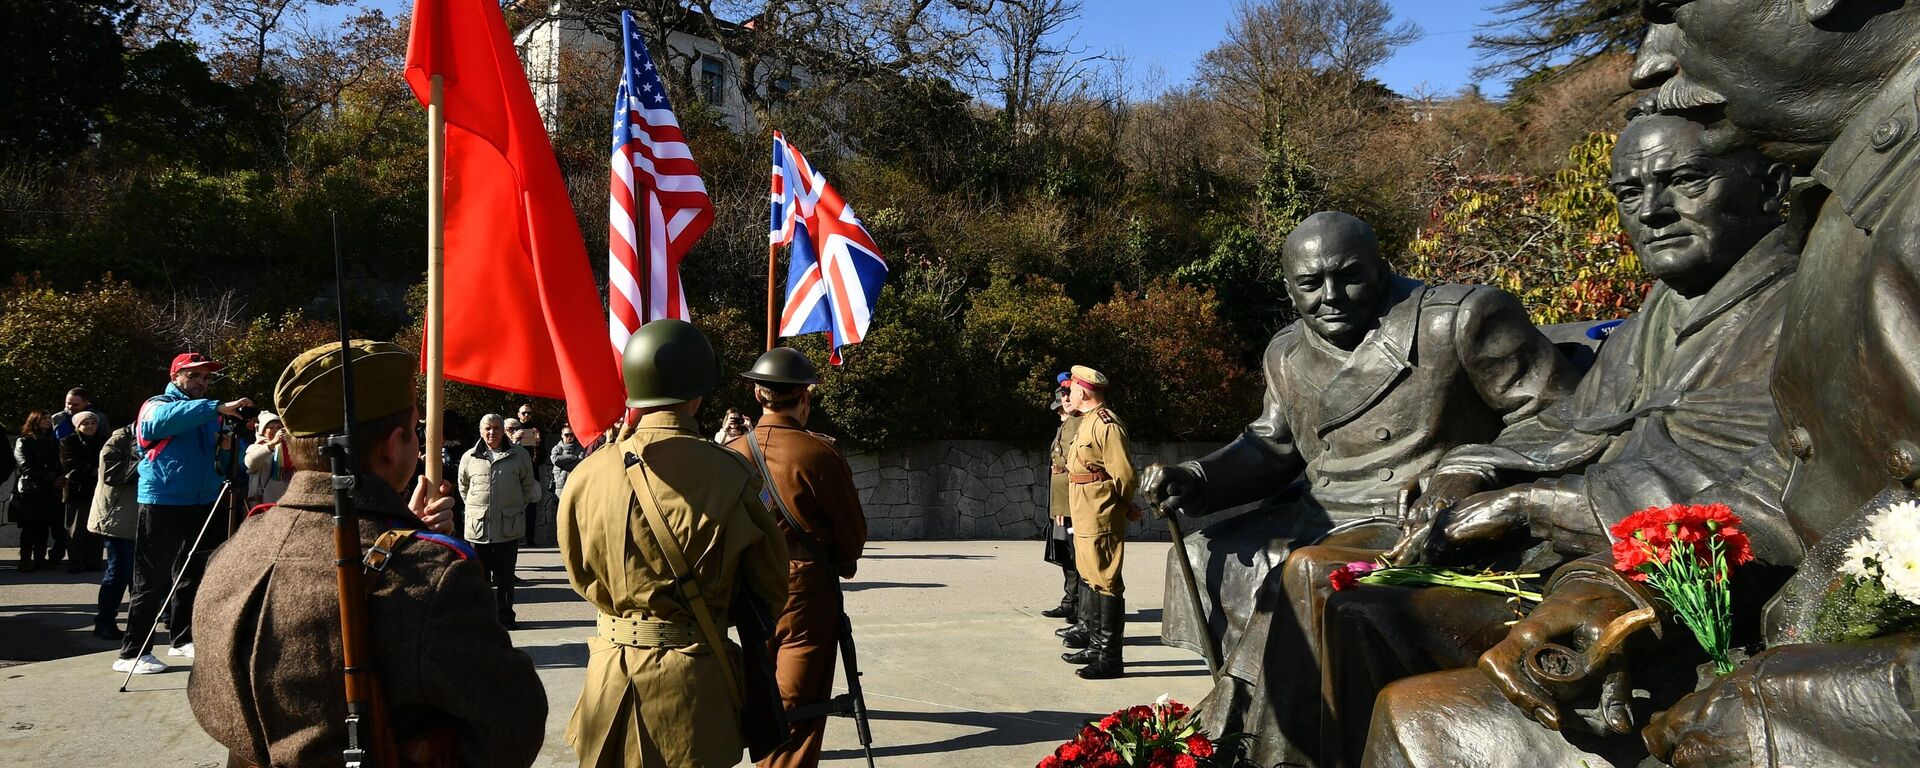 Monument in Yalta, Crimea dedicated to the famous meeting of the leaders of the Big Three Allies against Nazi Germany and the Axis Powers. February 2020. - Sputnik International, 1920, 09.05.2023